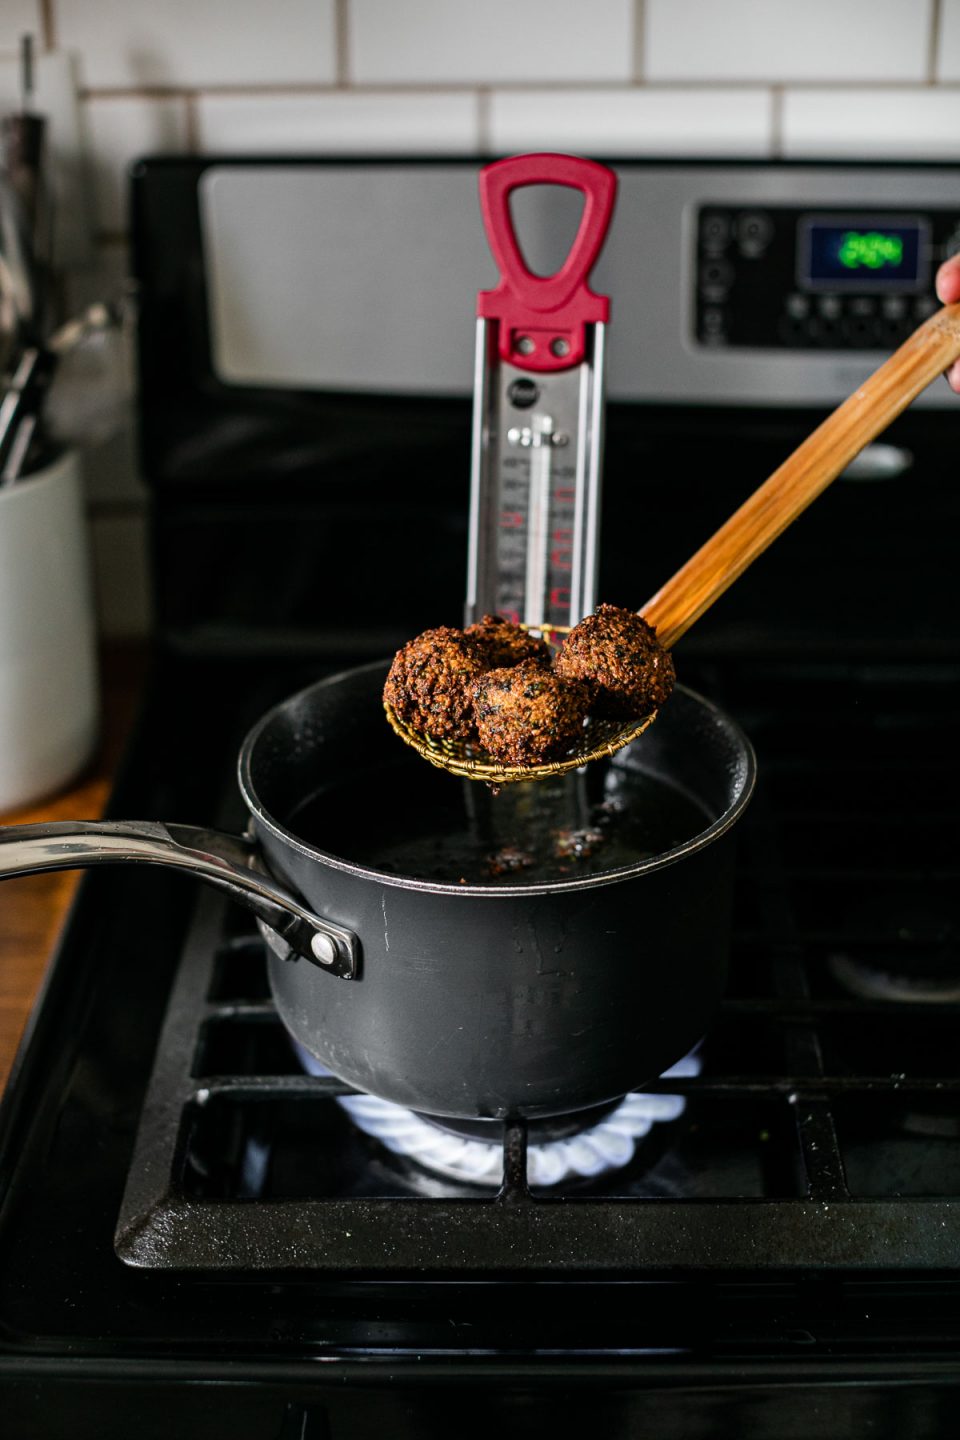 Browned & crispy cooked herb falafel balls are being lifted out of a sauce pan filled with frying oil by a spider strainer being held by a woman's hand. A candy thermometer rests inside of the sauce pan on top of a gas stovetop range. A crock filled with kitchen utensils sits atop an adjacent butcher block countertop and a white subway tile is shown in the background.